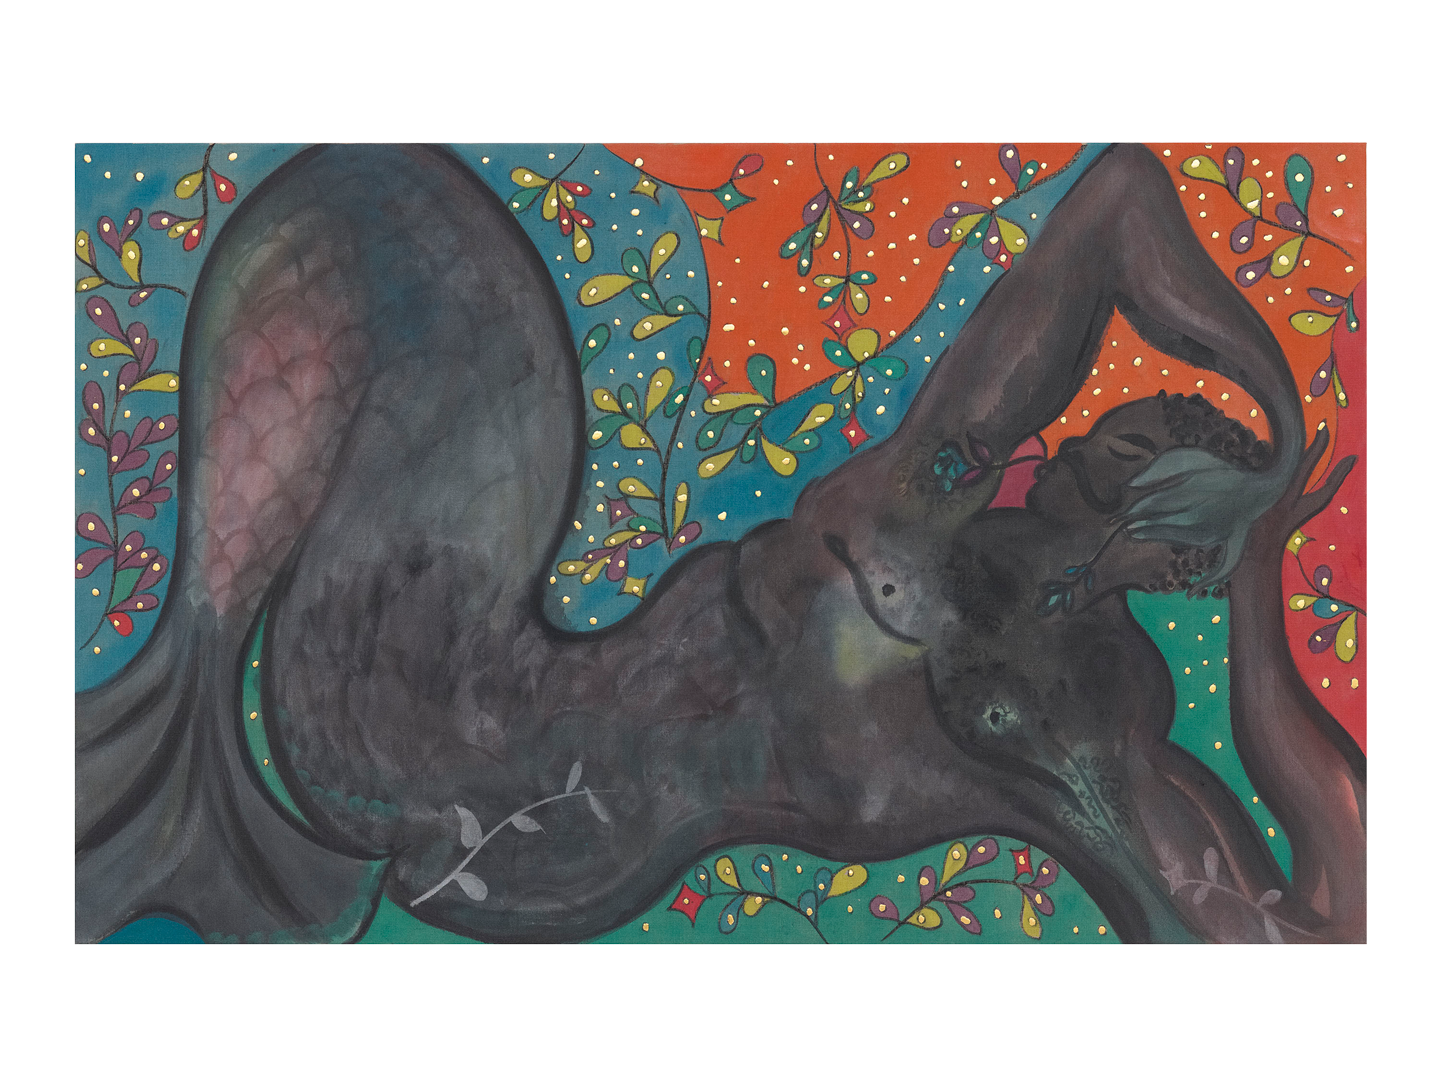 A painting by Chris Ofili, titled Sleeper 2 (Odysseus), dated 2019.